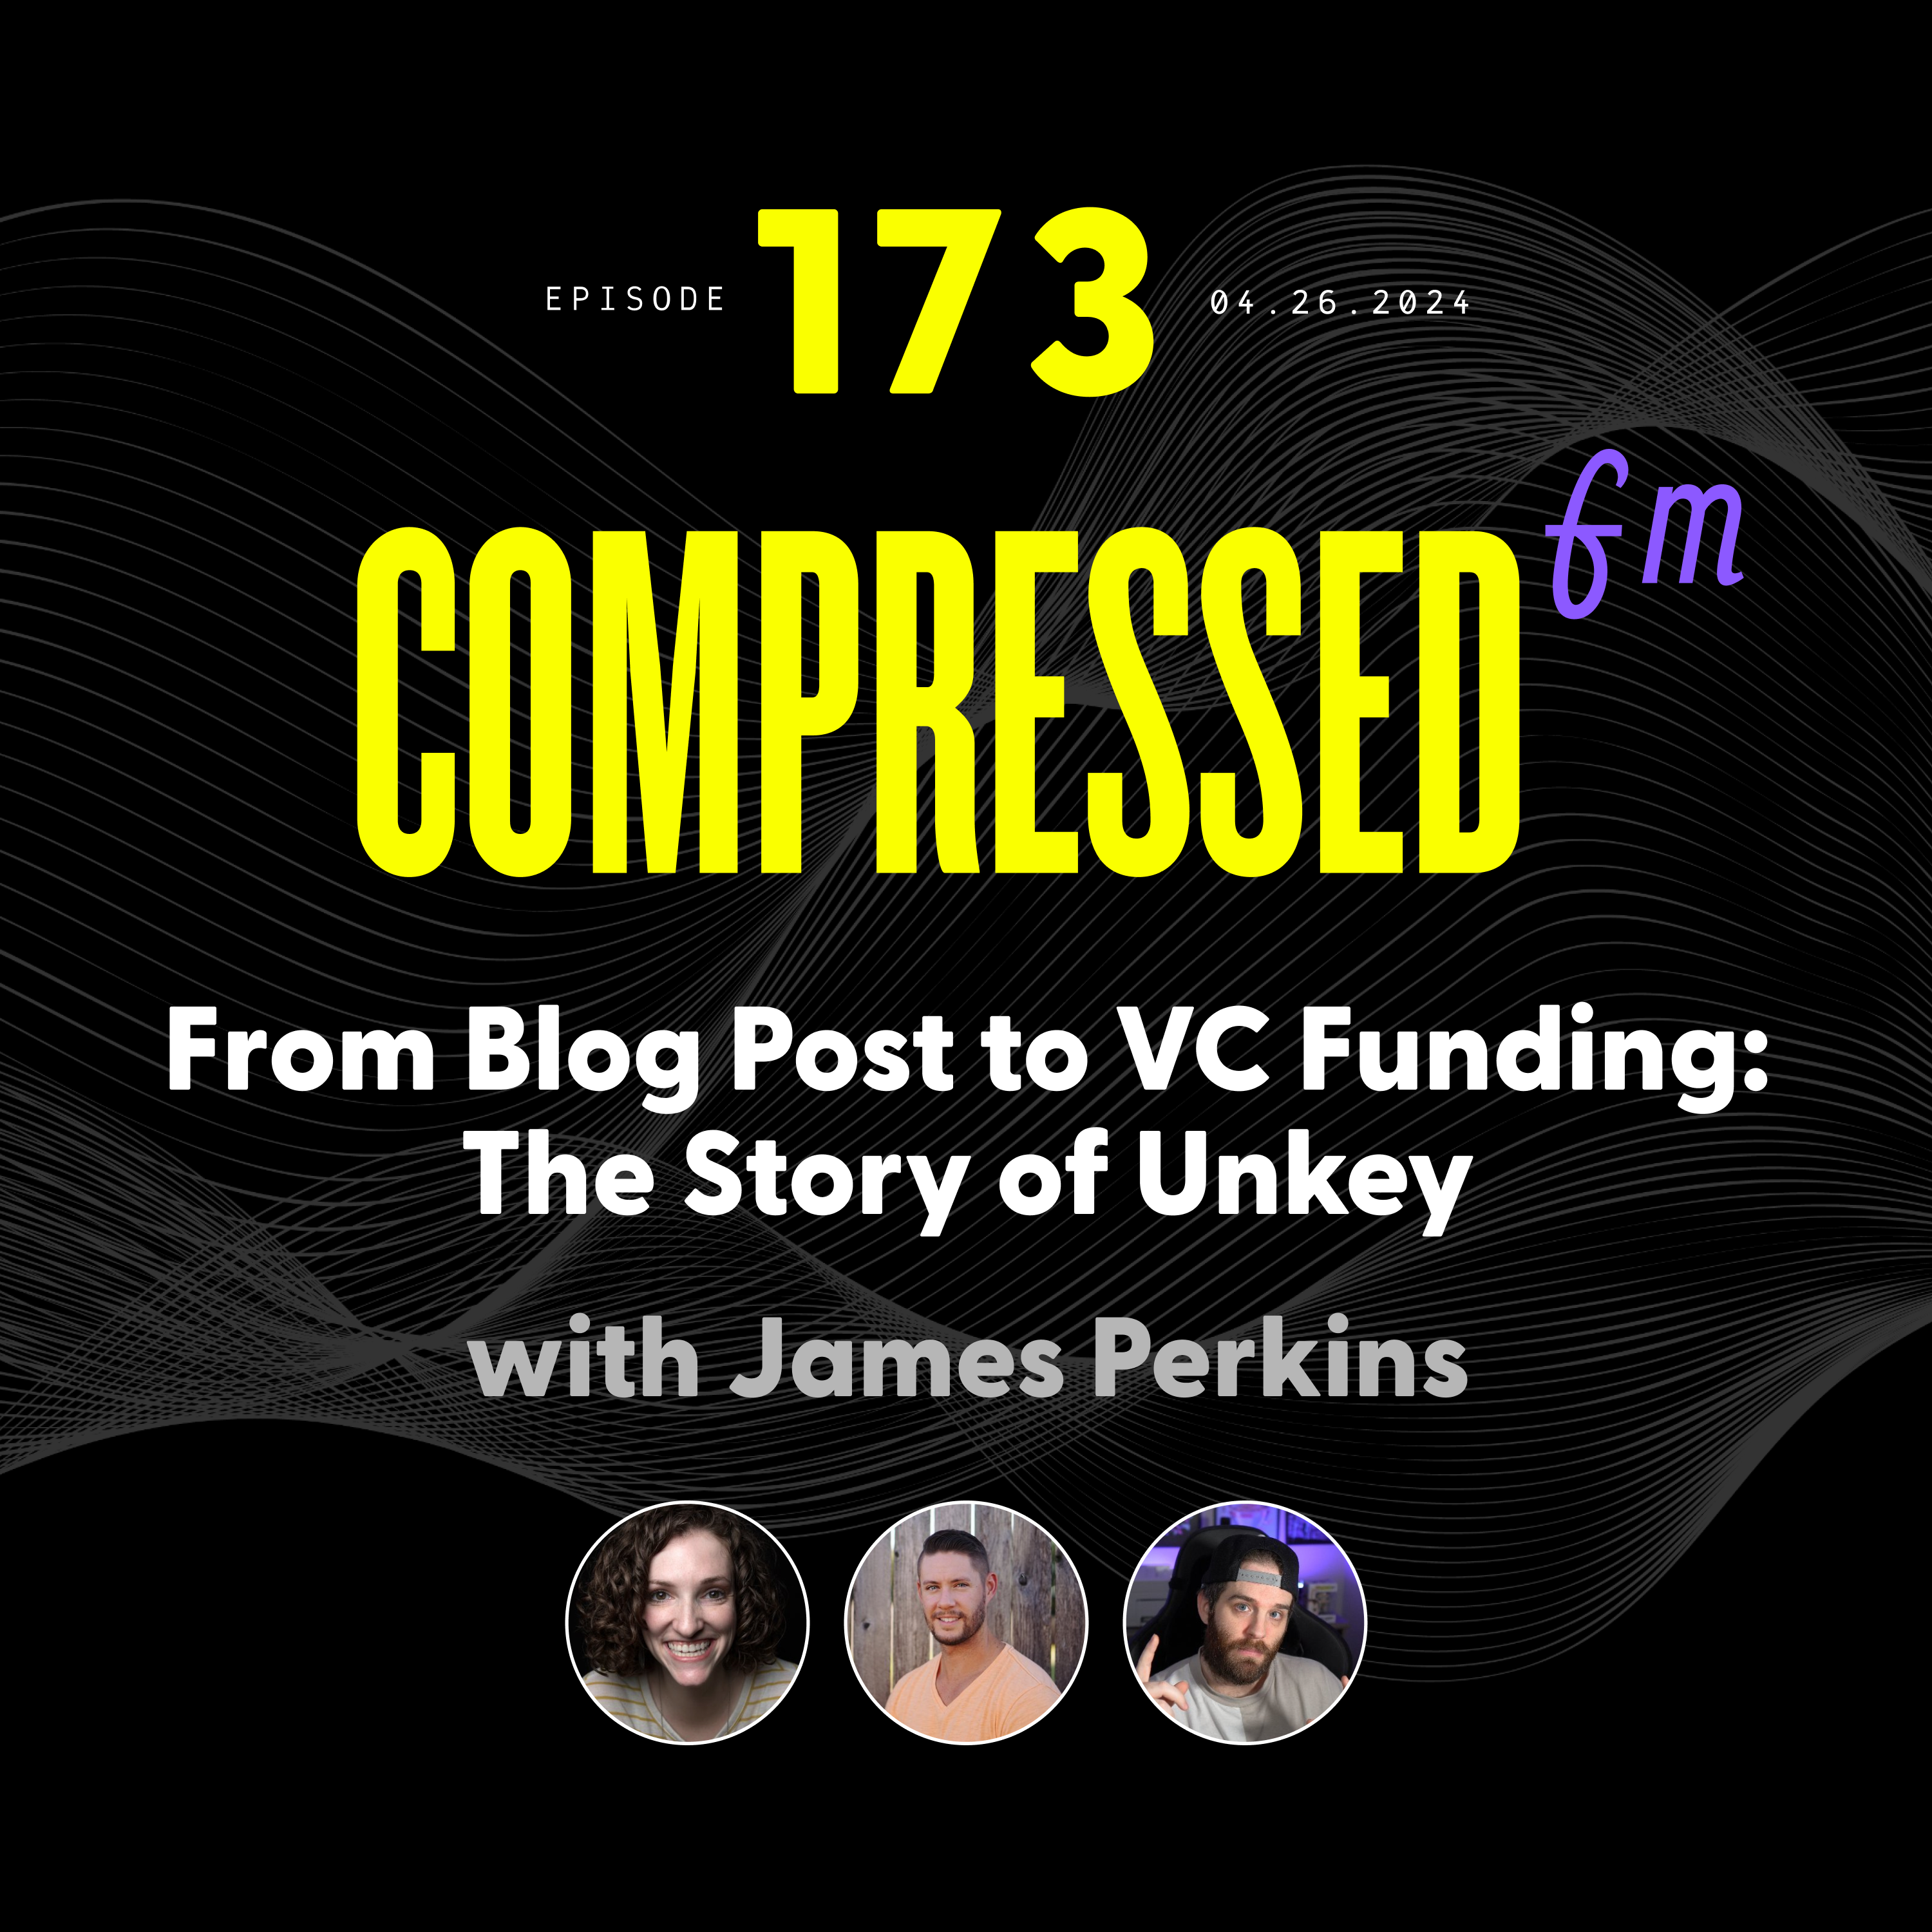 From Blog Post to VC Funding: The Story of Unkey